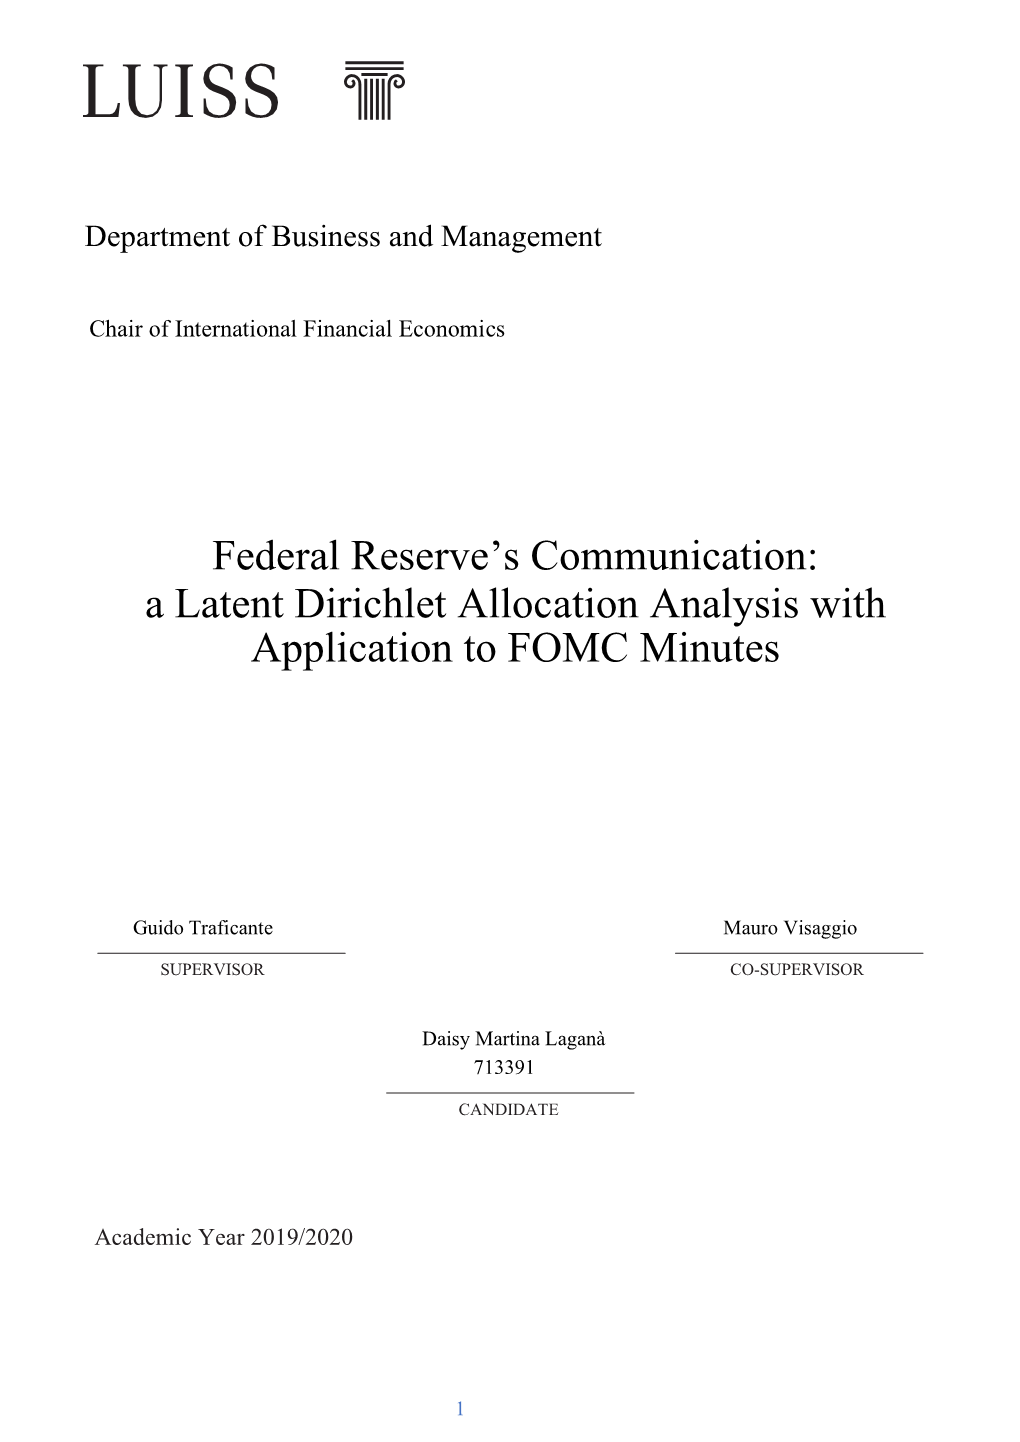 Federal Reserve's Communication: a Latent Dirichlet Allocation Analysis